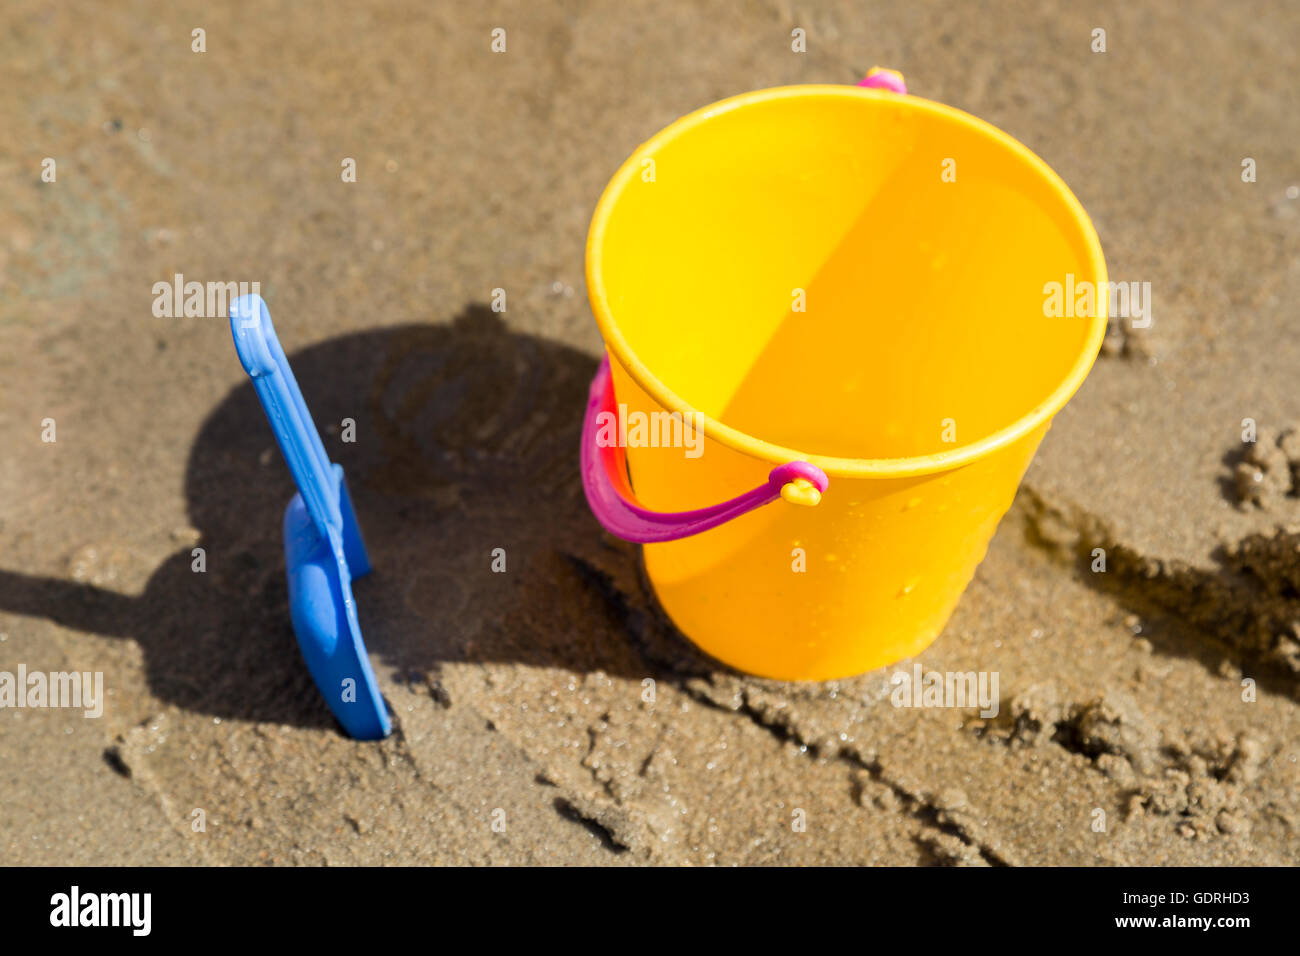 Toy Spade and Bucket in Sand. Stock Photo